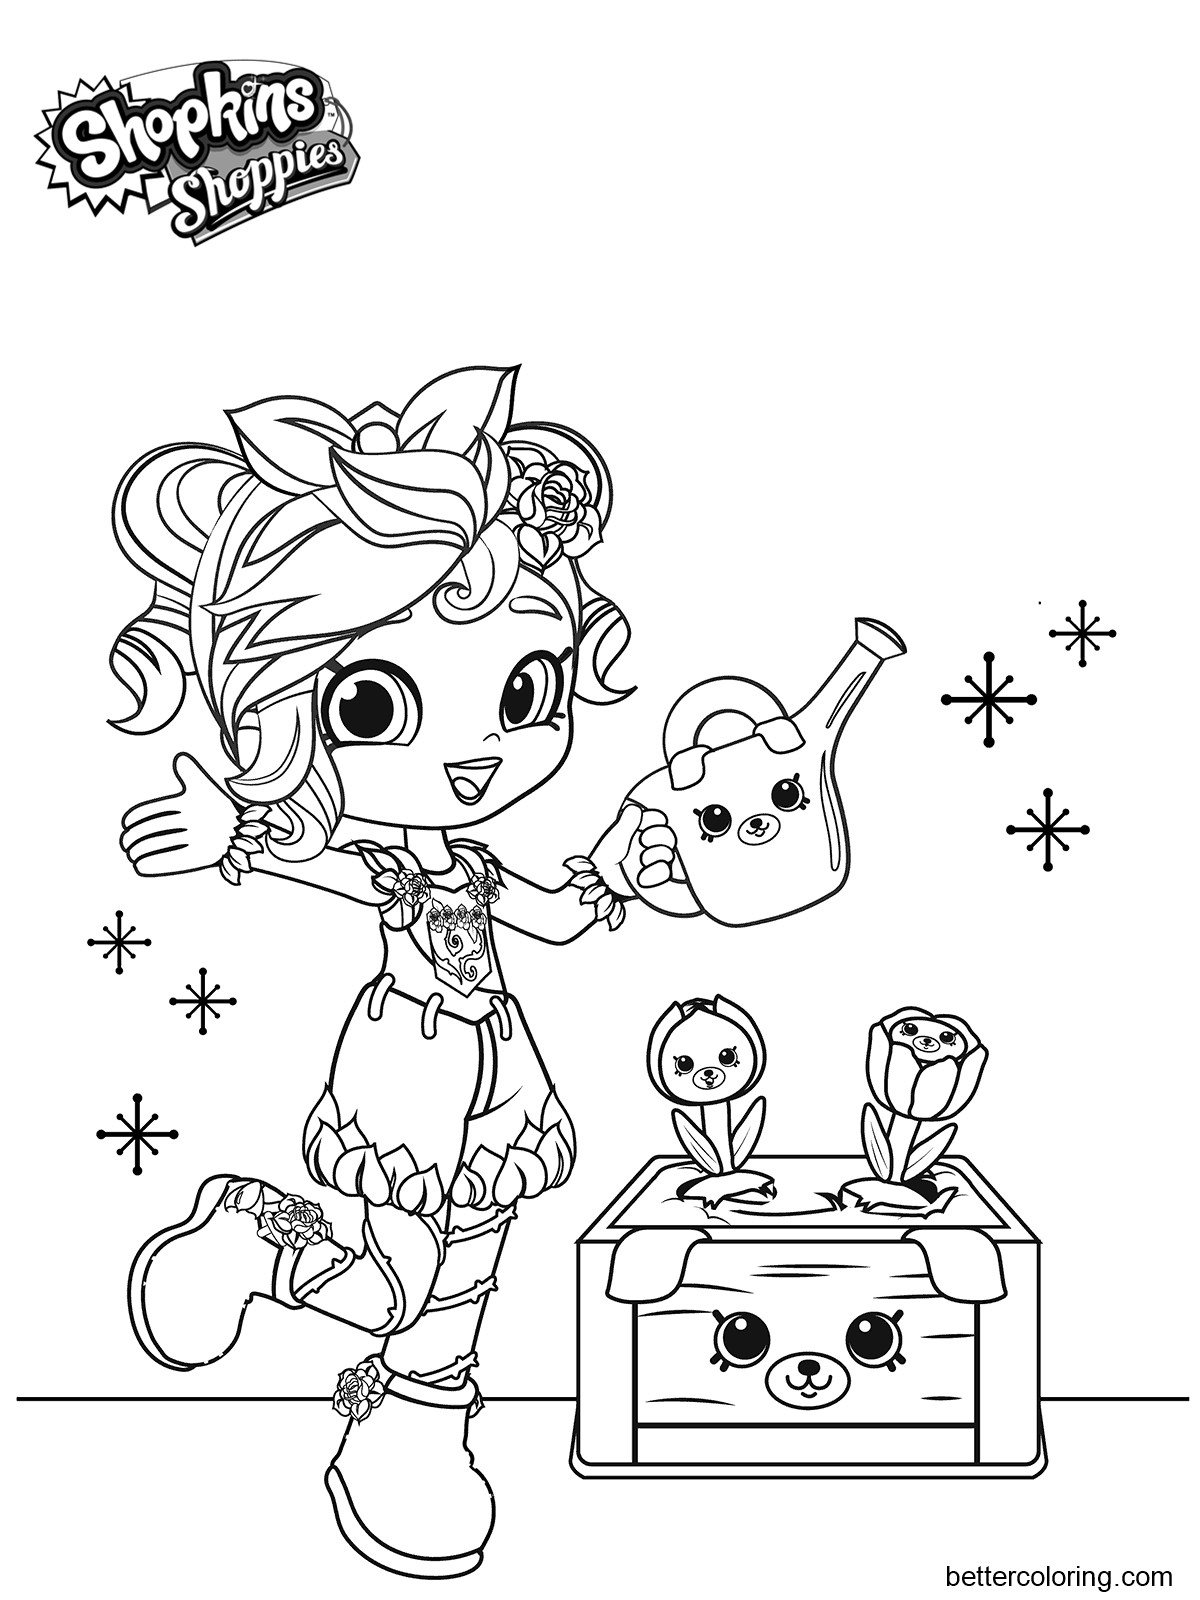 Girly Coloring Pages For Adults
 Girly Shoppies Coloring Pages Free Printable Coloring Pages